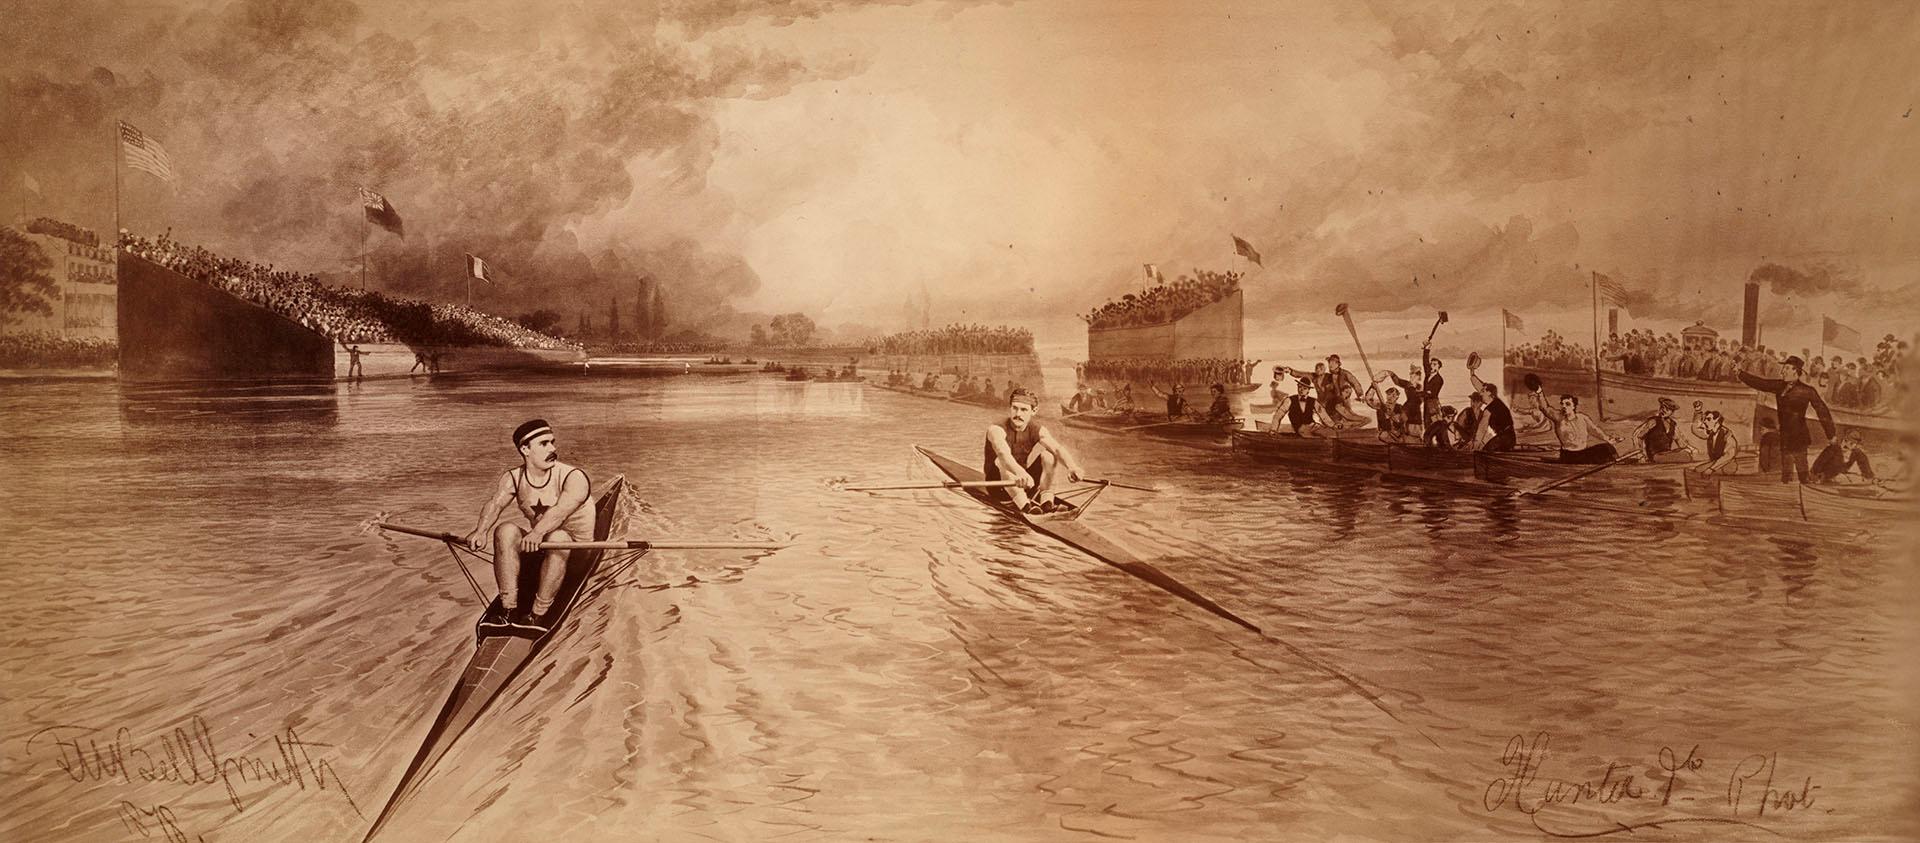 Image shows a lake view with some rowing competition participants.